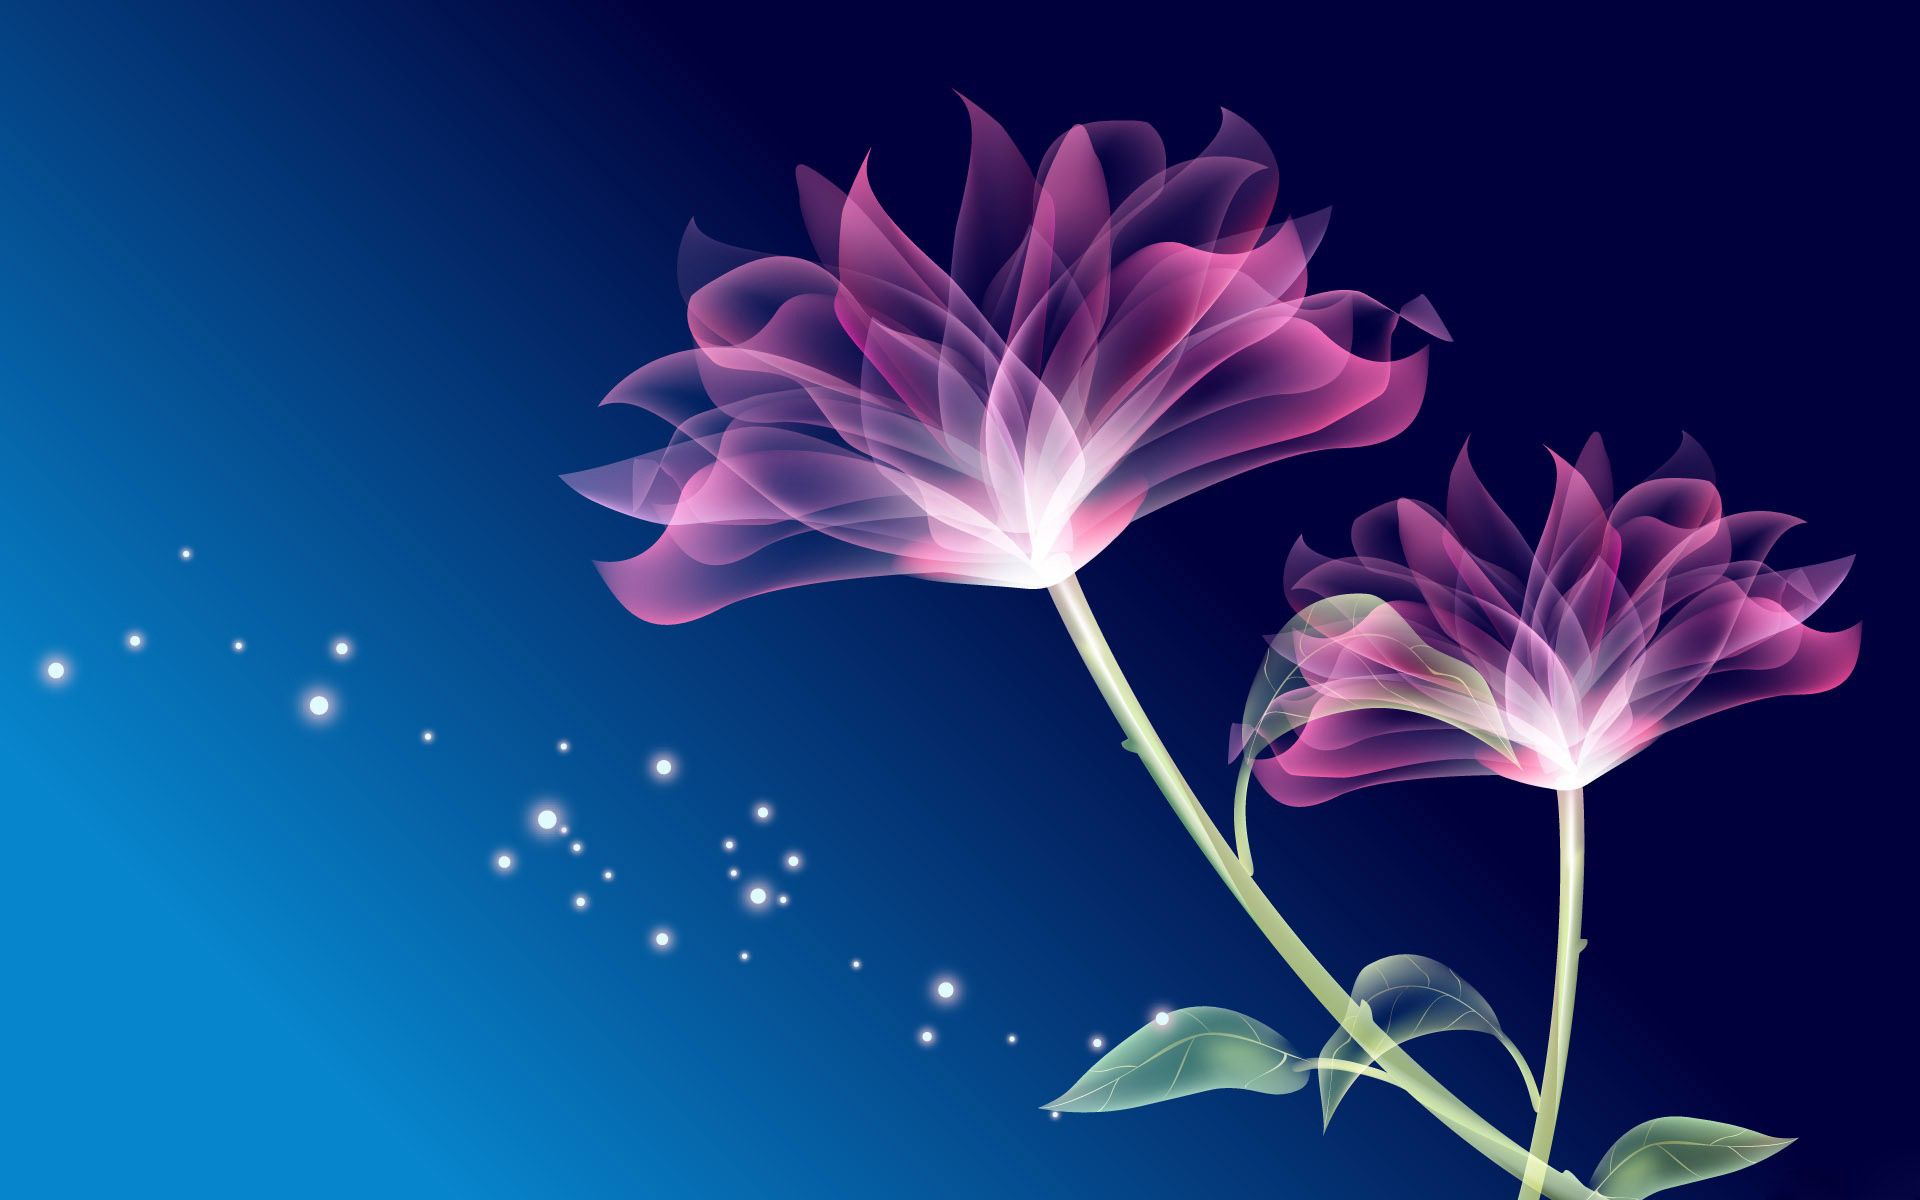 50 Beautiful Flower Wallpaper Images For Download